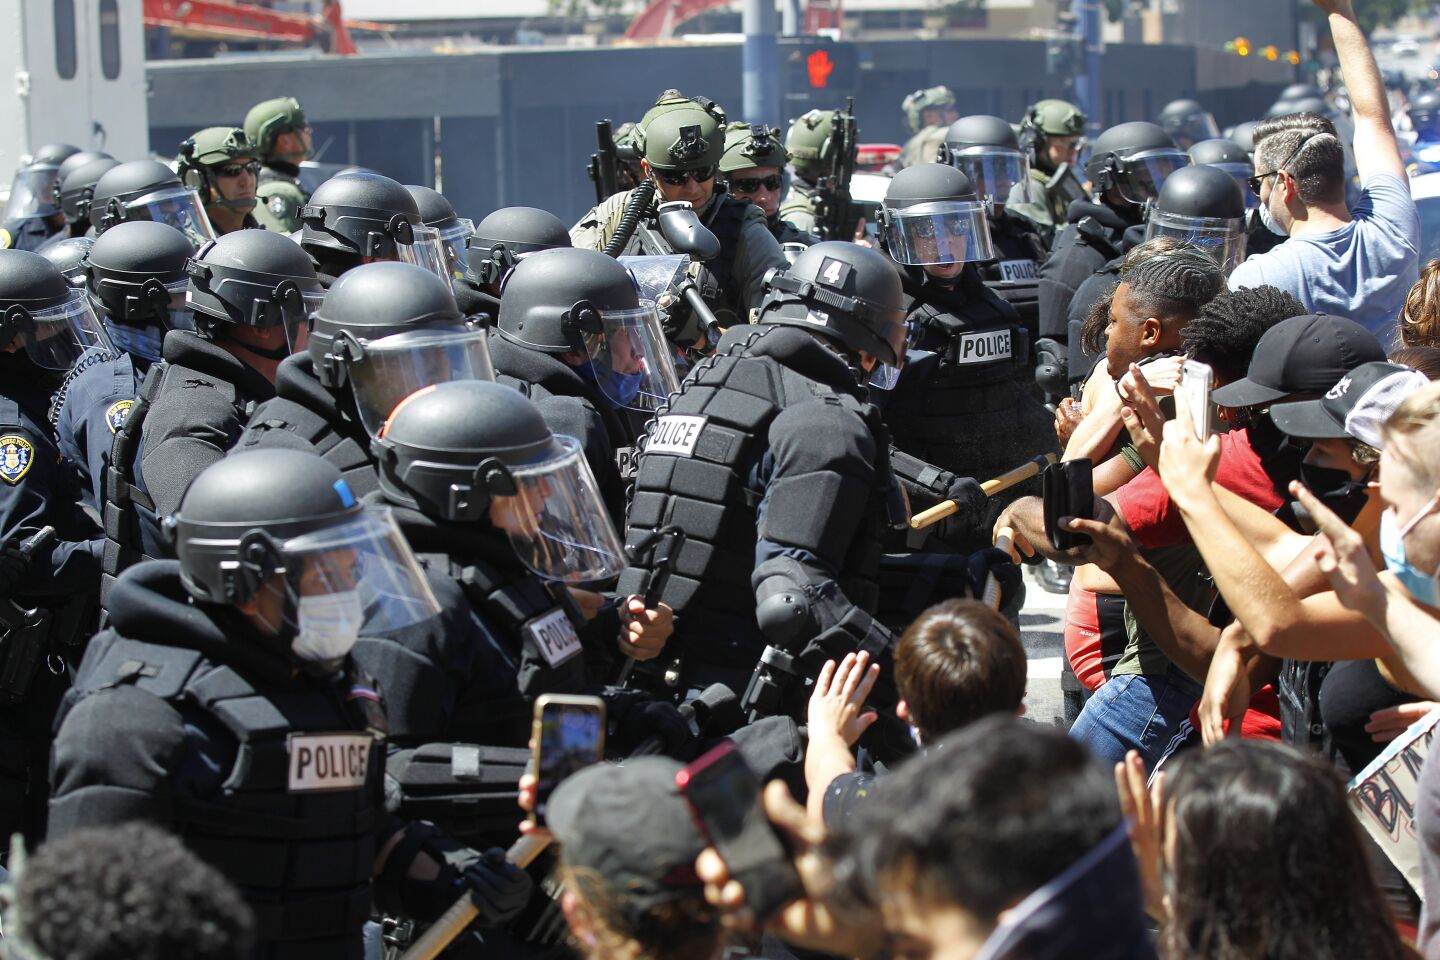 San Diego police fired non lethal bullets at protesters near the San Diego Hall of Justice in San Diego on May 31, 2020. The group was protesting the death of George Floyd.